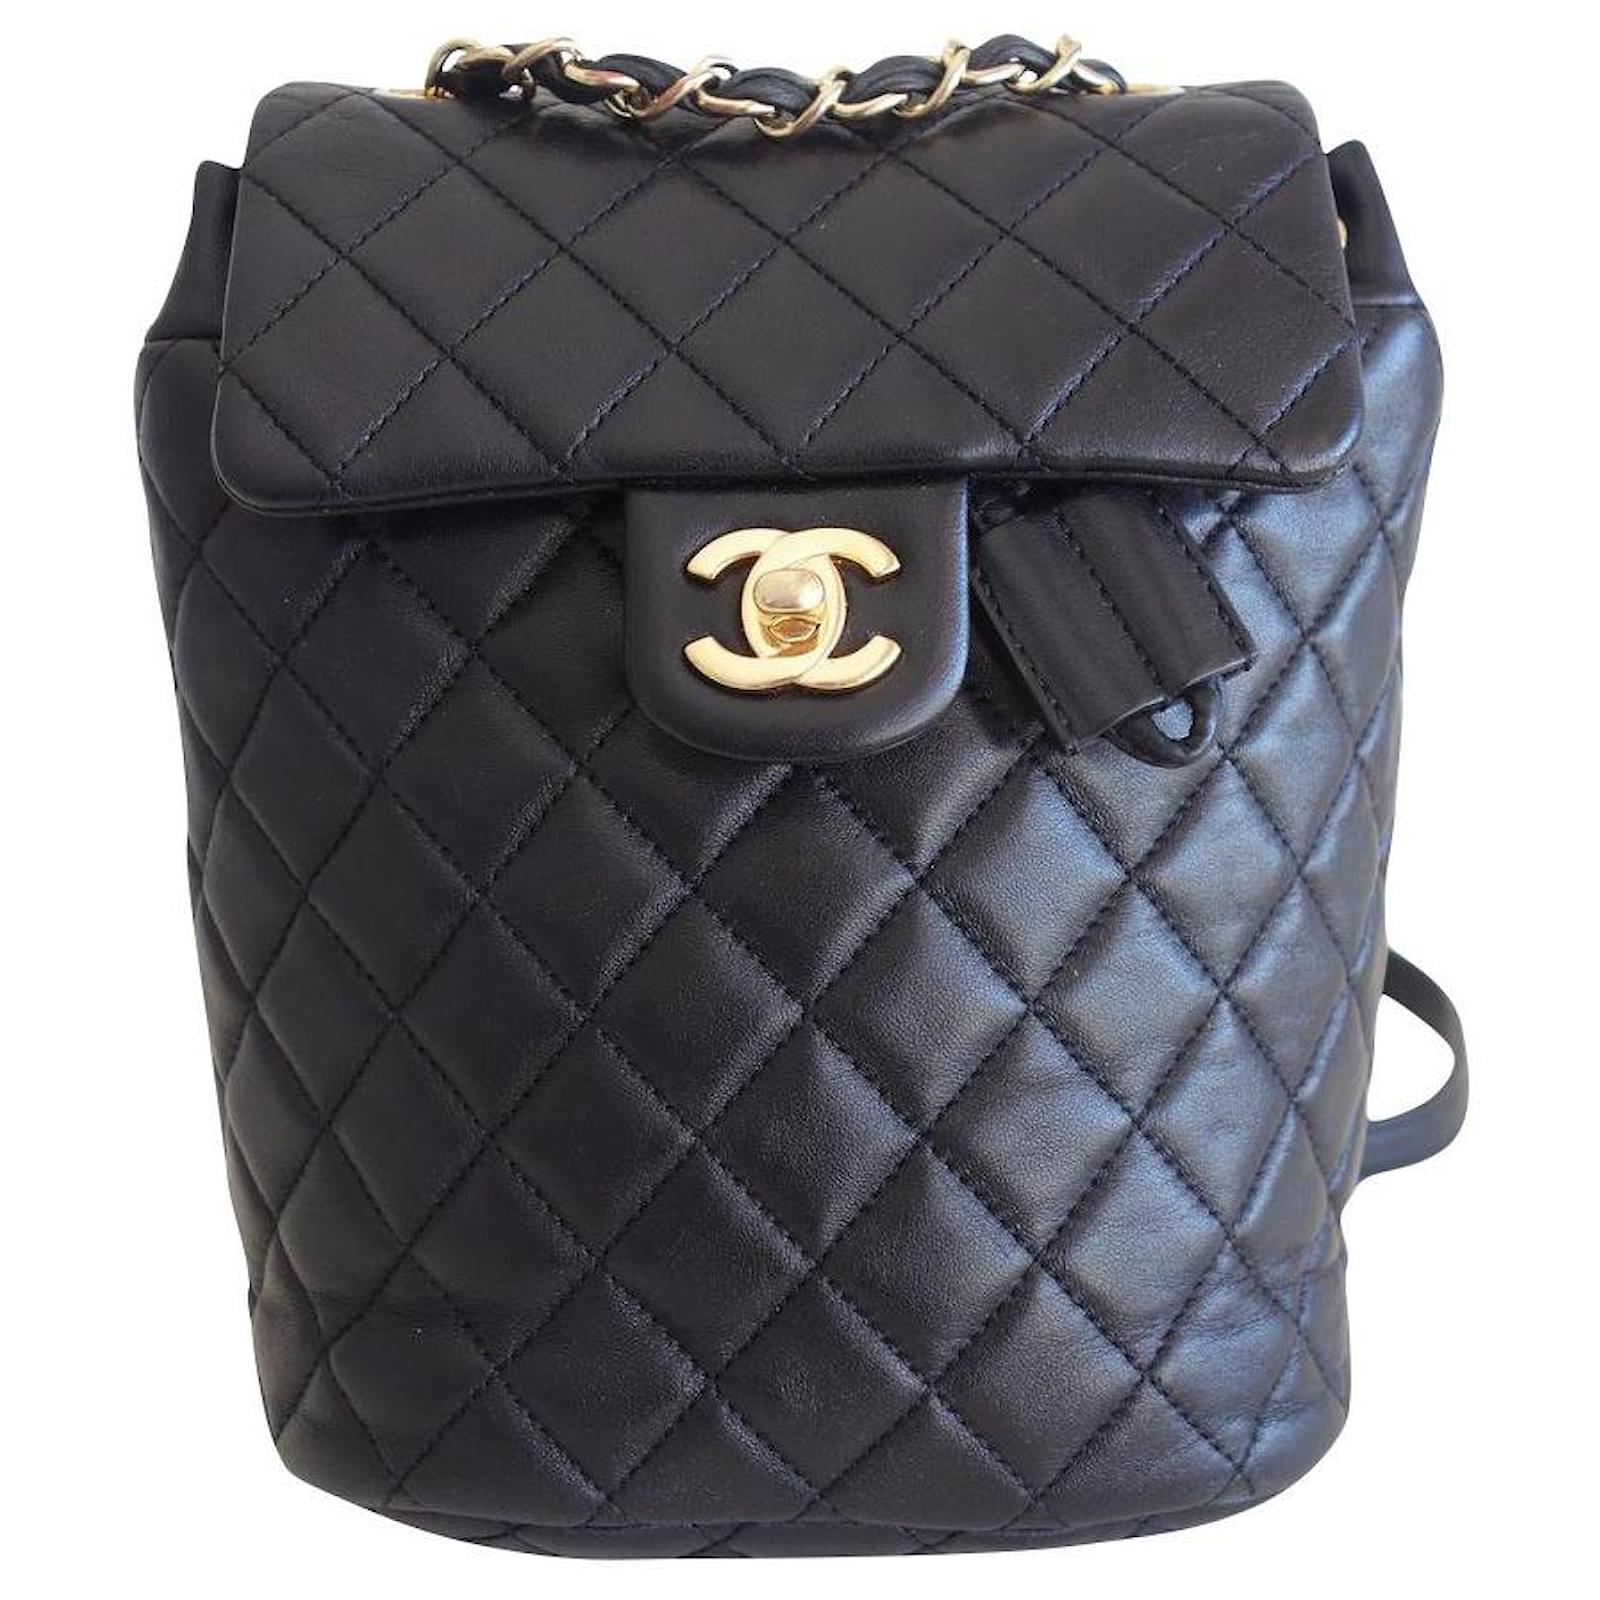 Backpacks Chanel Small Chanel Backpack